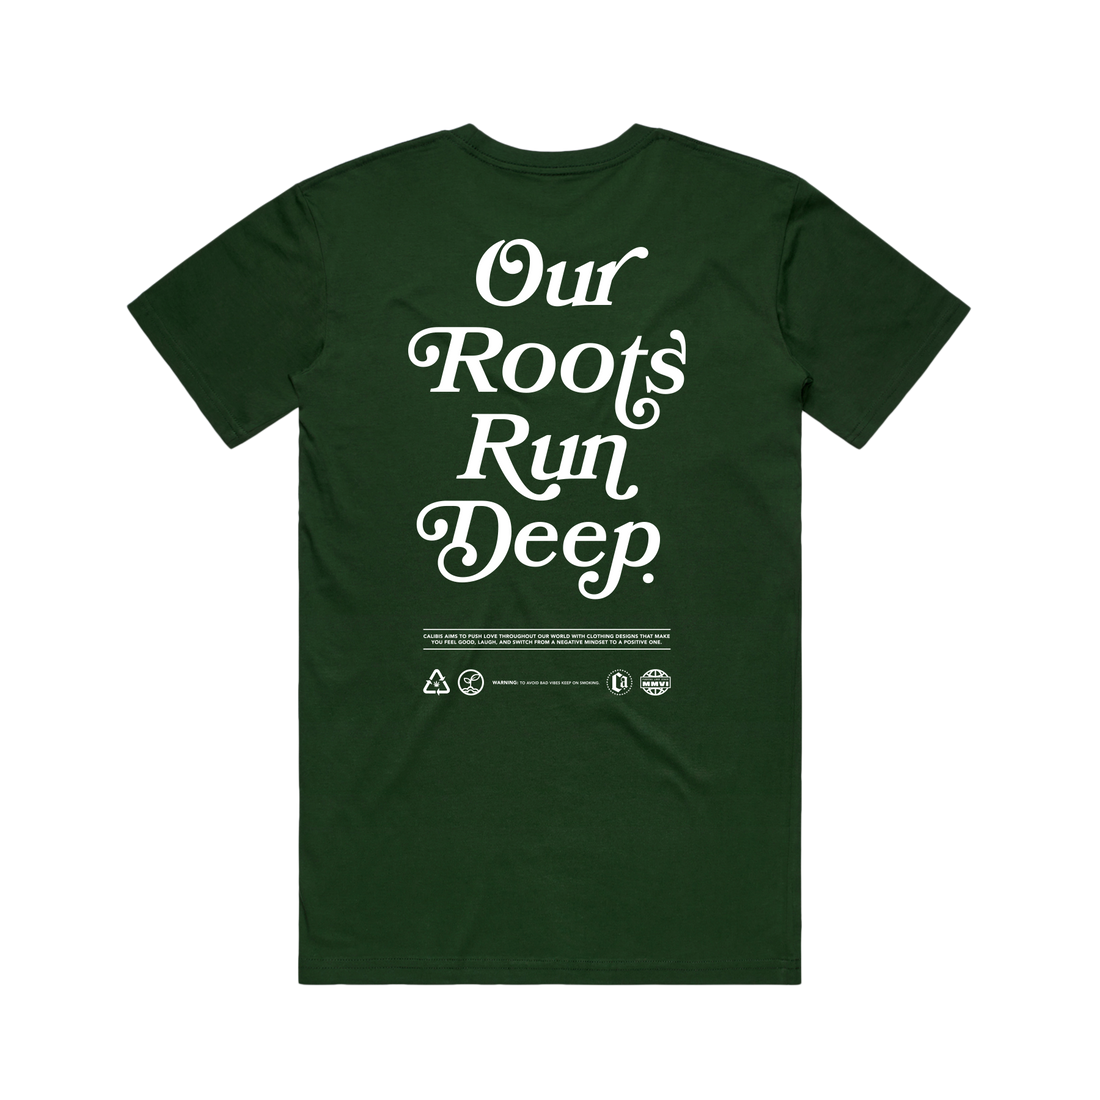 Our Roots Run Deep Tee